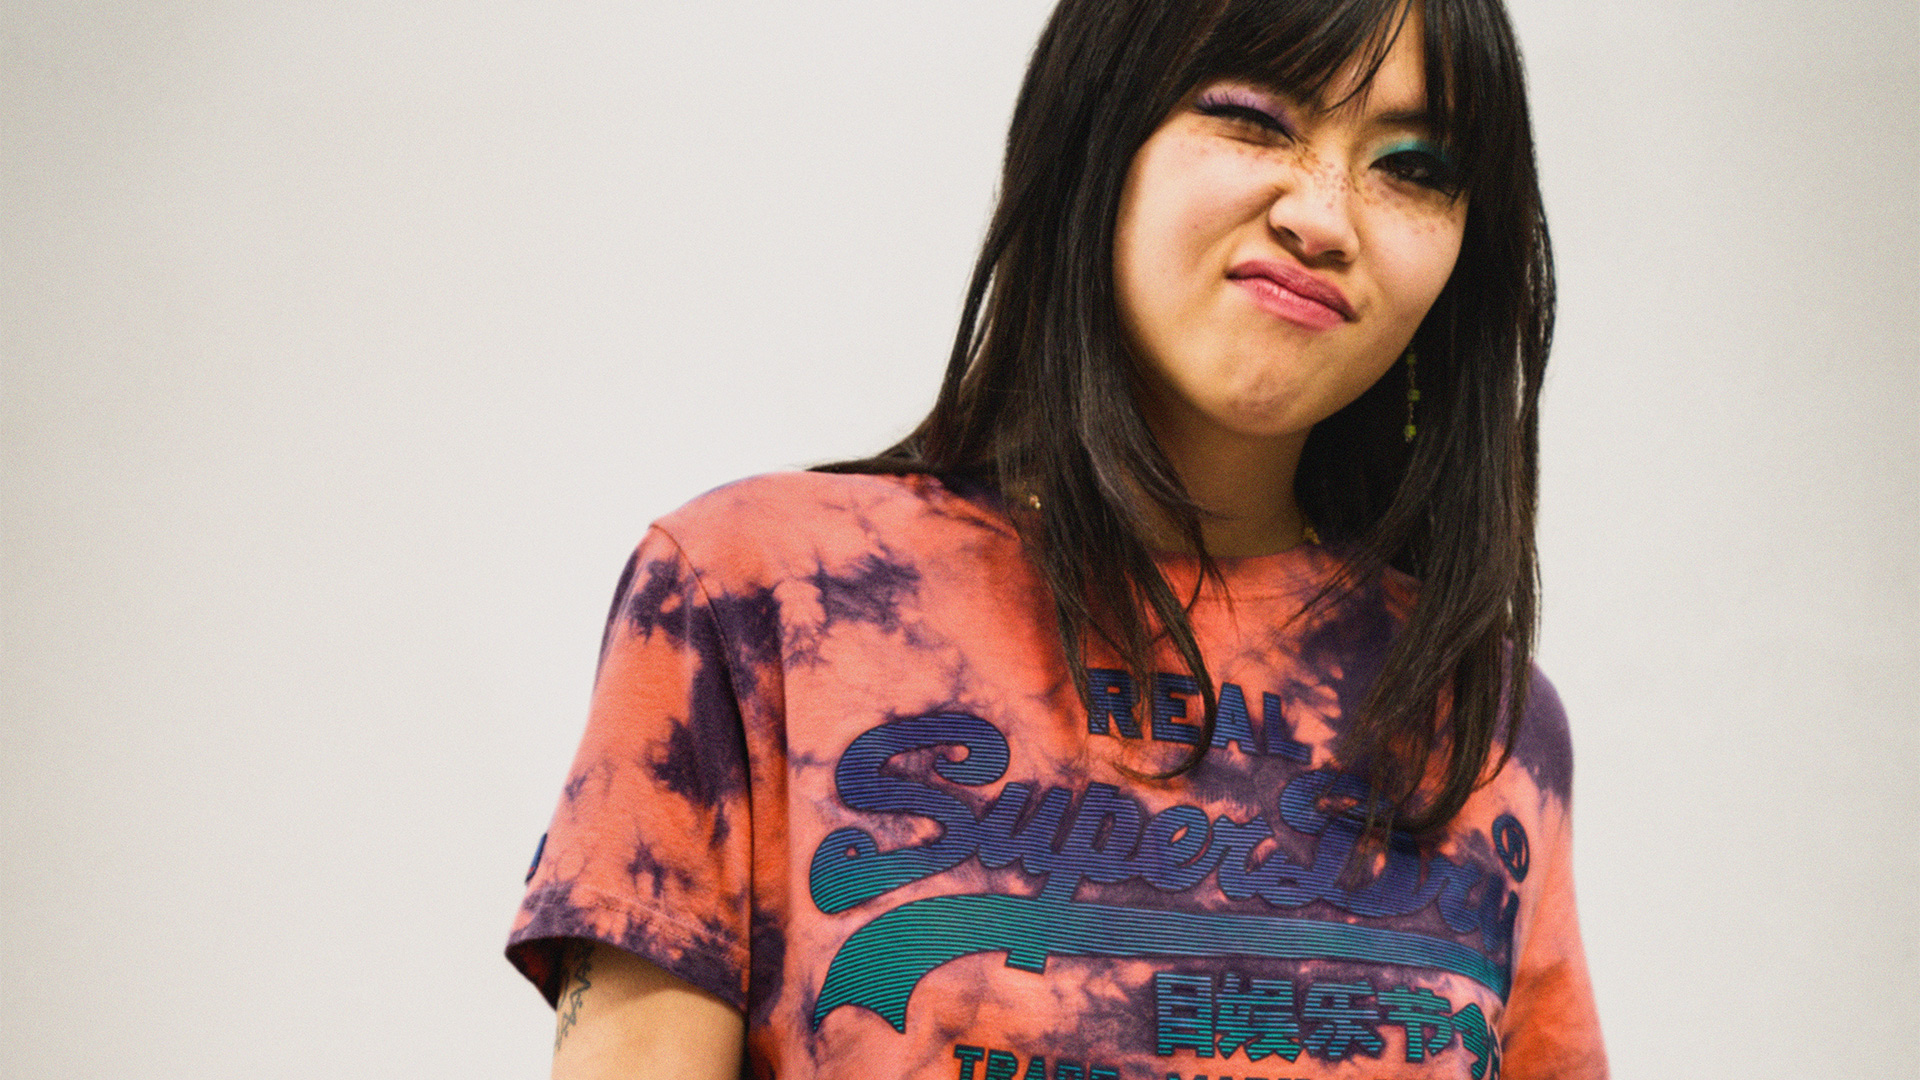 An image of a young Asian woman pulling a face with a screwed expression, wearing a bright orange Superdry t-shirt